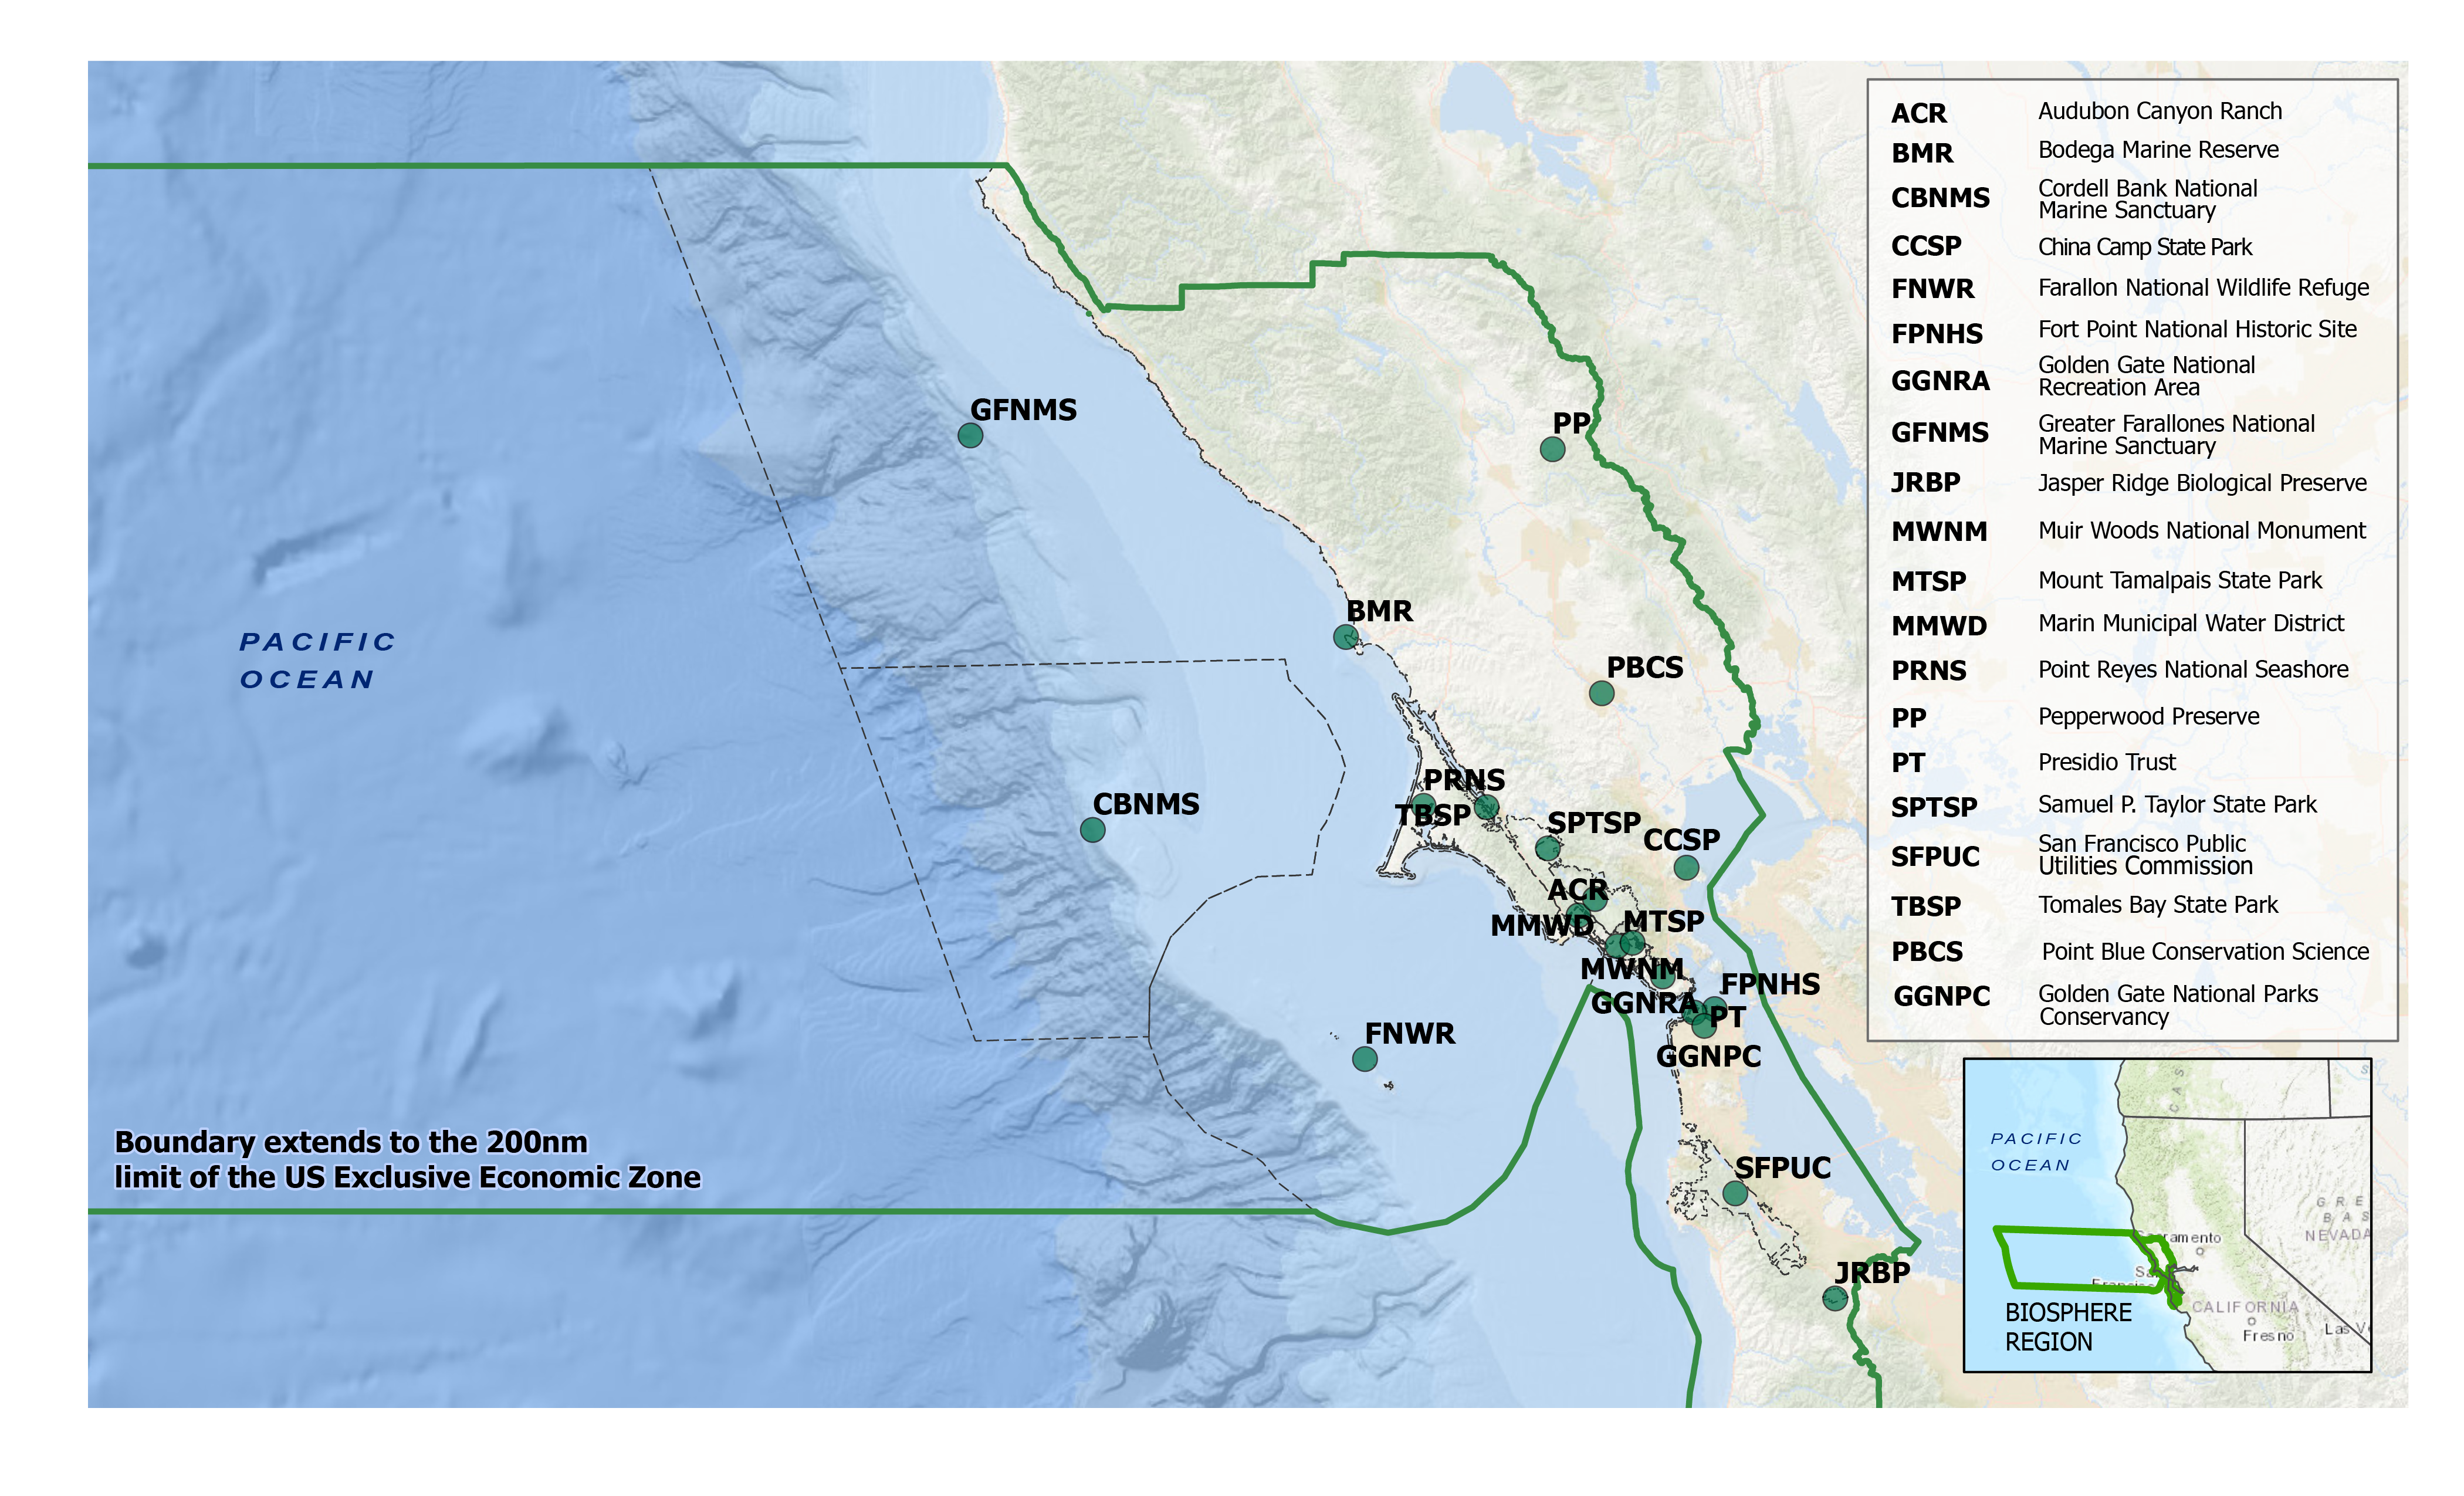 A map of the Golden Gate Biosphere Network, highlighting the protected lands and waters along Central California's coast.